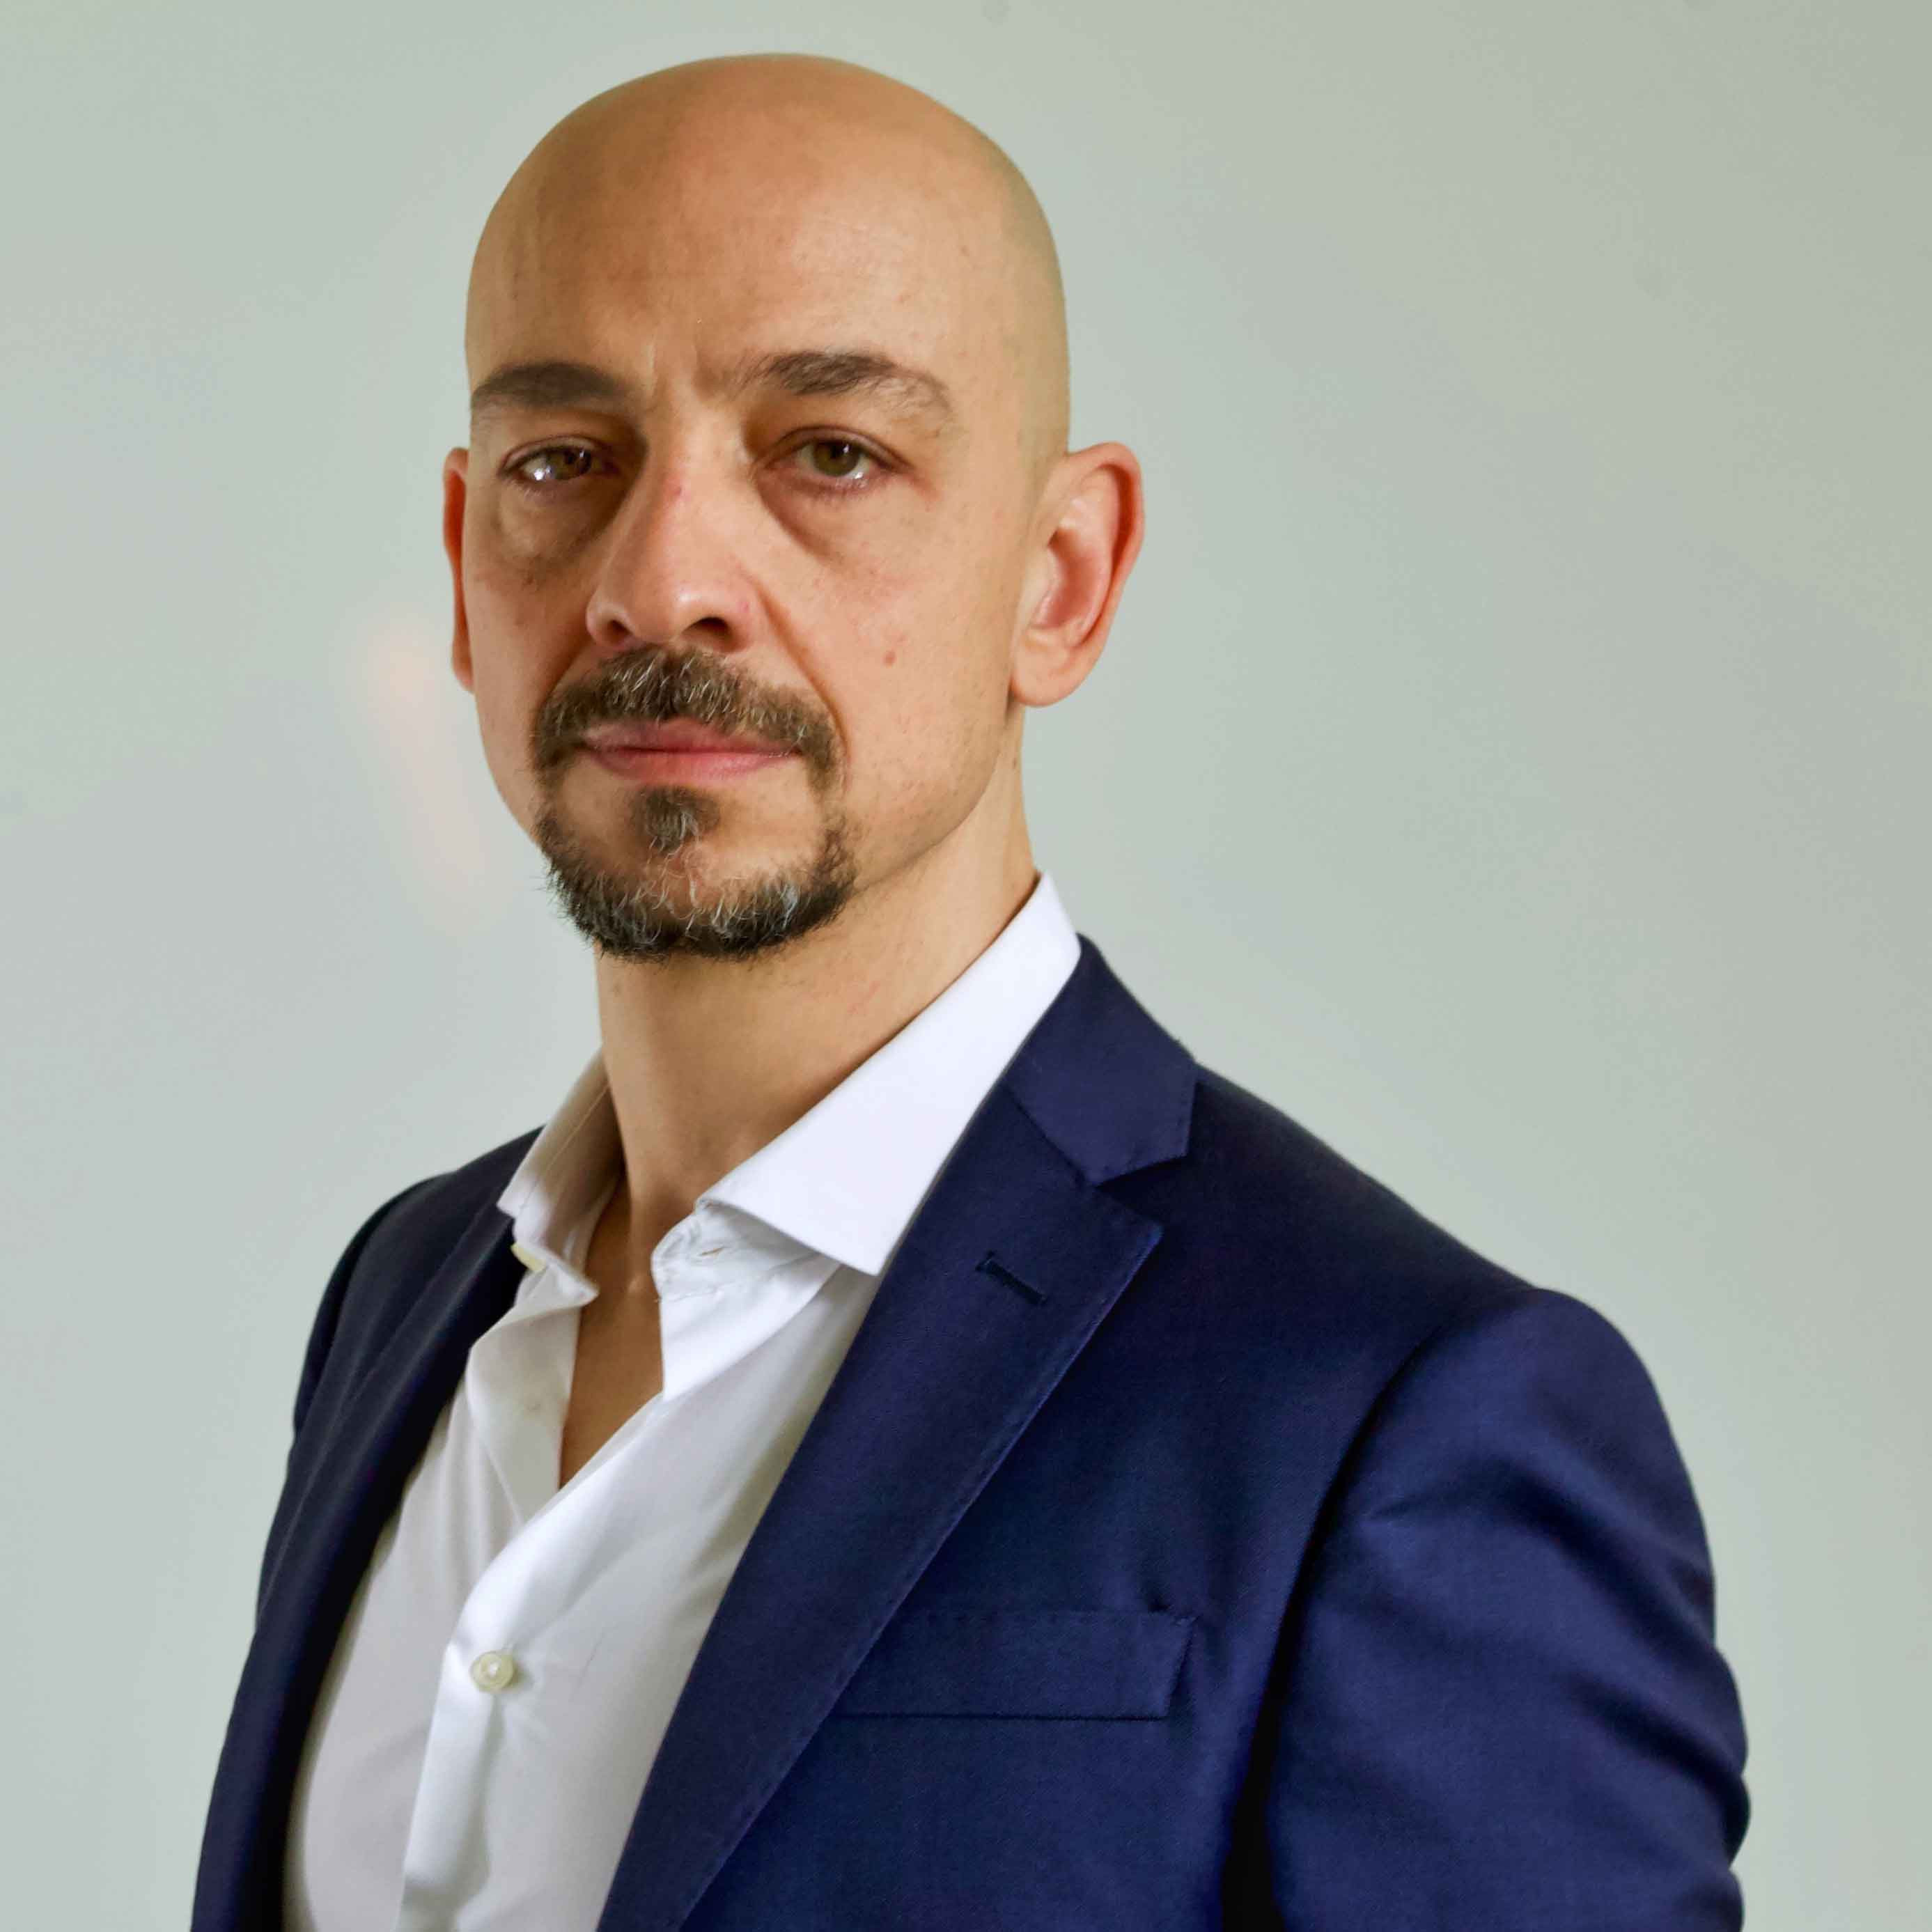 T-Direct si affida a Davide Franchi nel ruolo di Growth & Innovation Manager